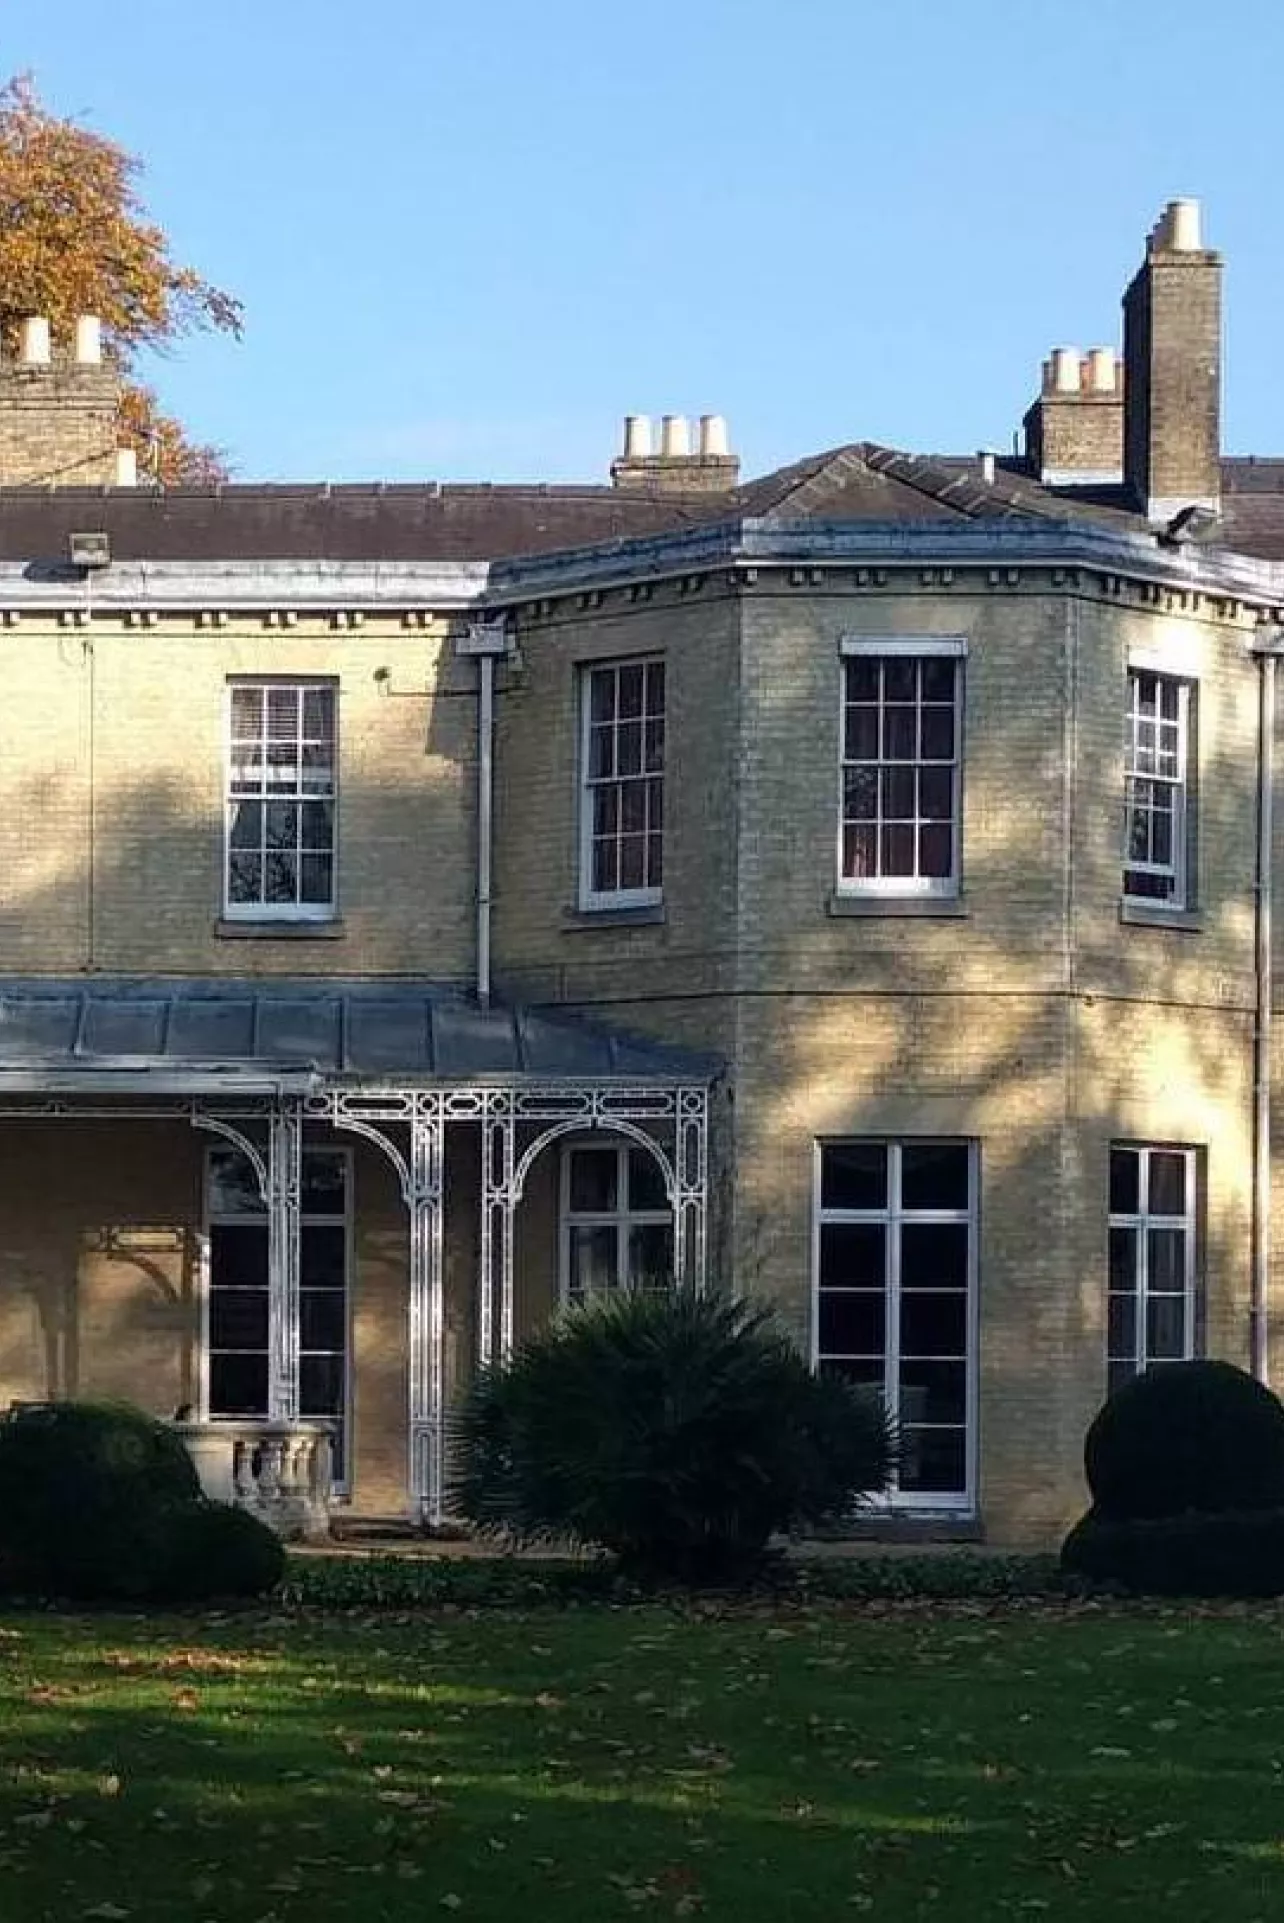 The Grove is a regency era house in the centre of the main site of Fitzwilliam College.